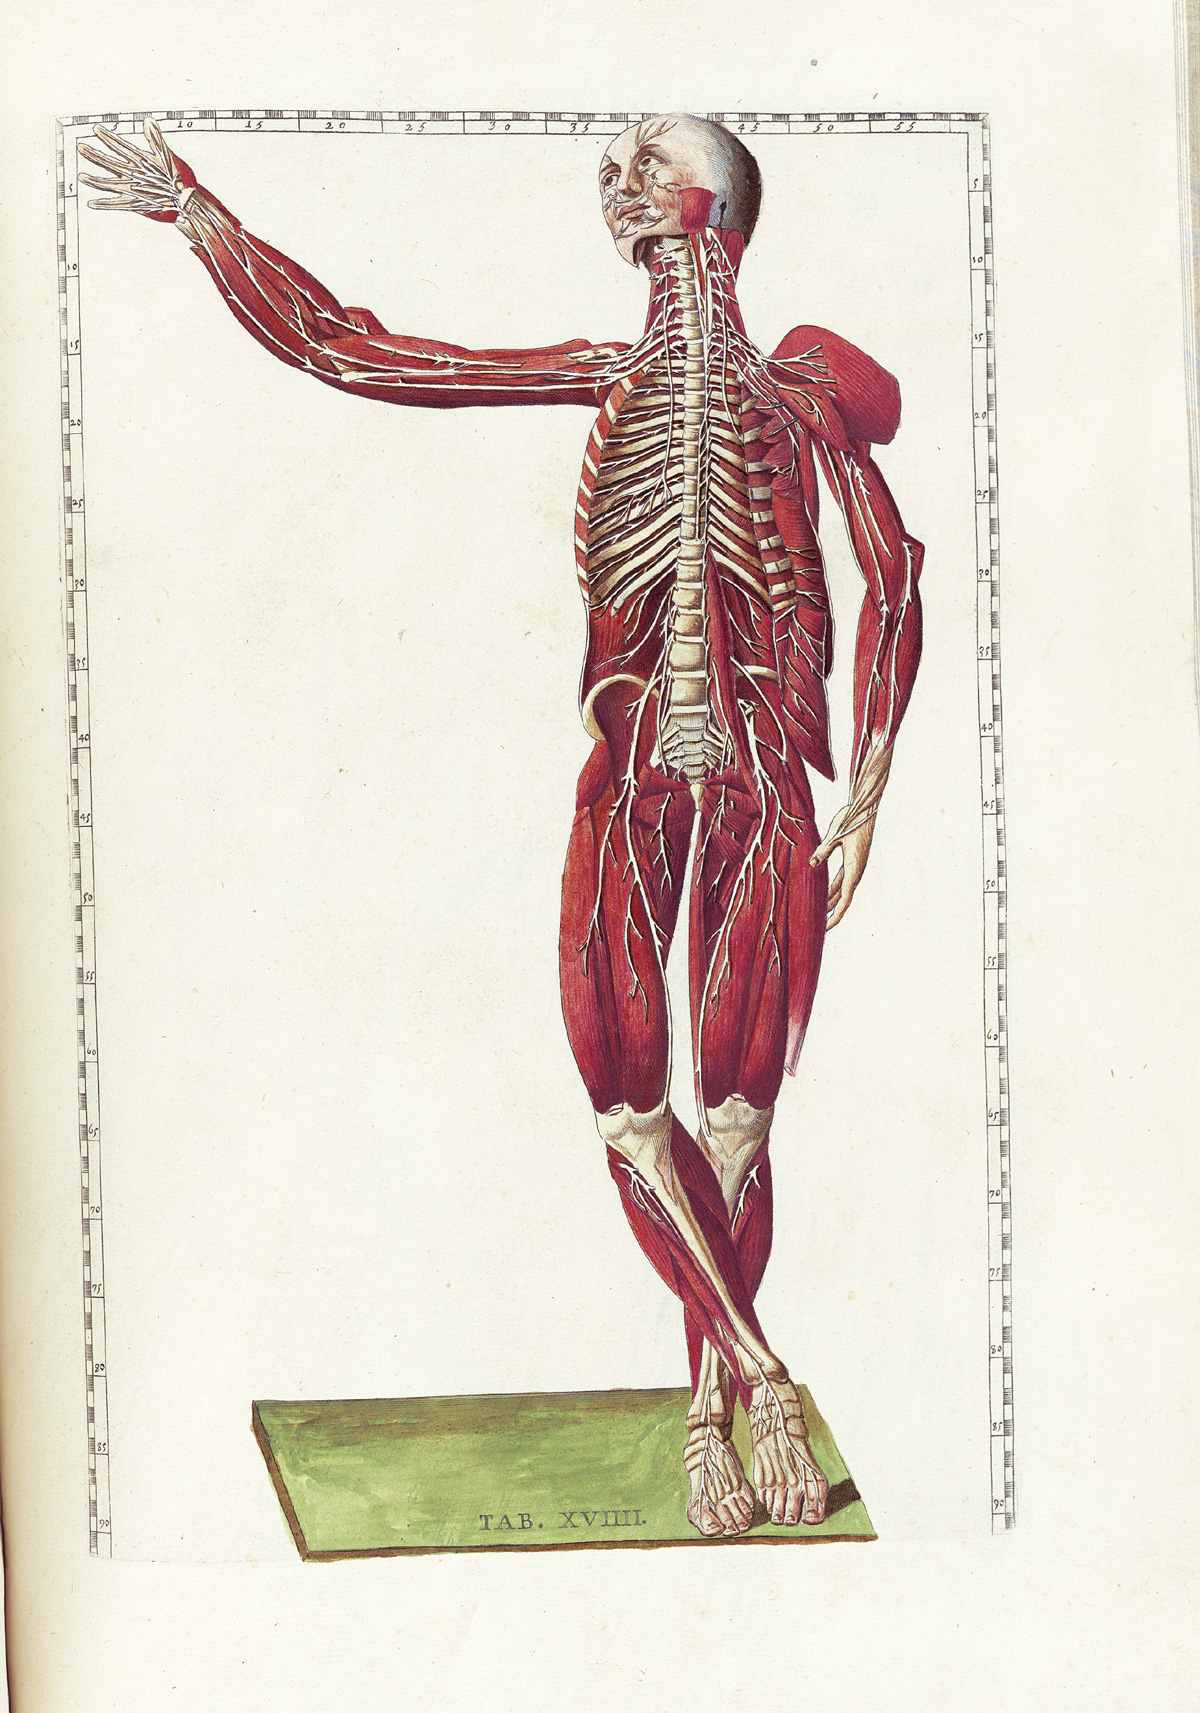 Hand-colored etching of a facing standing figure with flesh removed to expose the muscles and joints showing the pathways of the nerves from the brain and spinal cord throughout the body; from Bartholomeo Eustachi’s Tabulae anatomicae, NLM Call no.: WZ 260 E87t 1783.